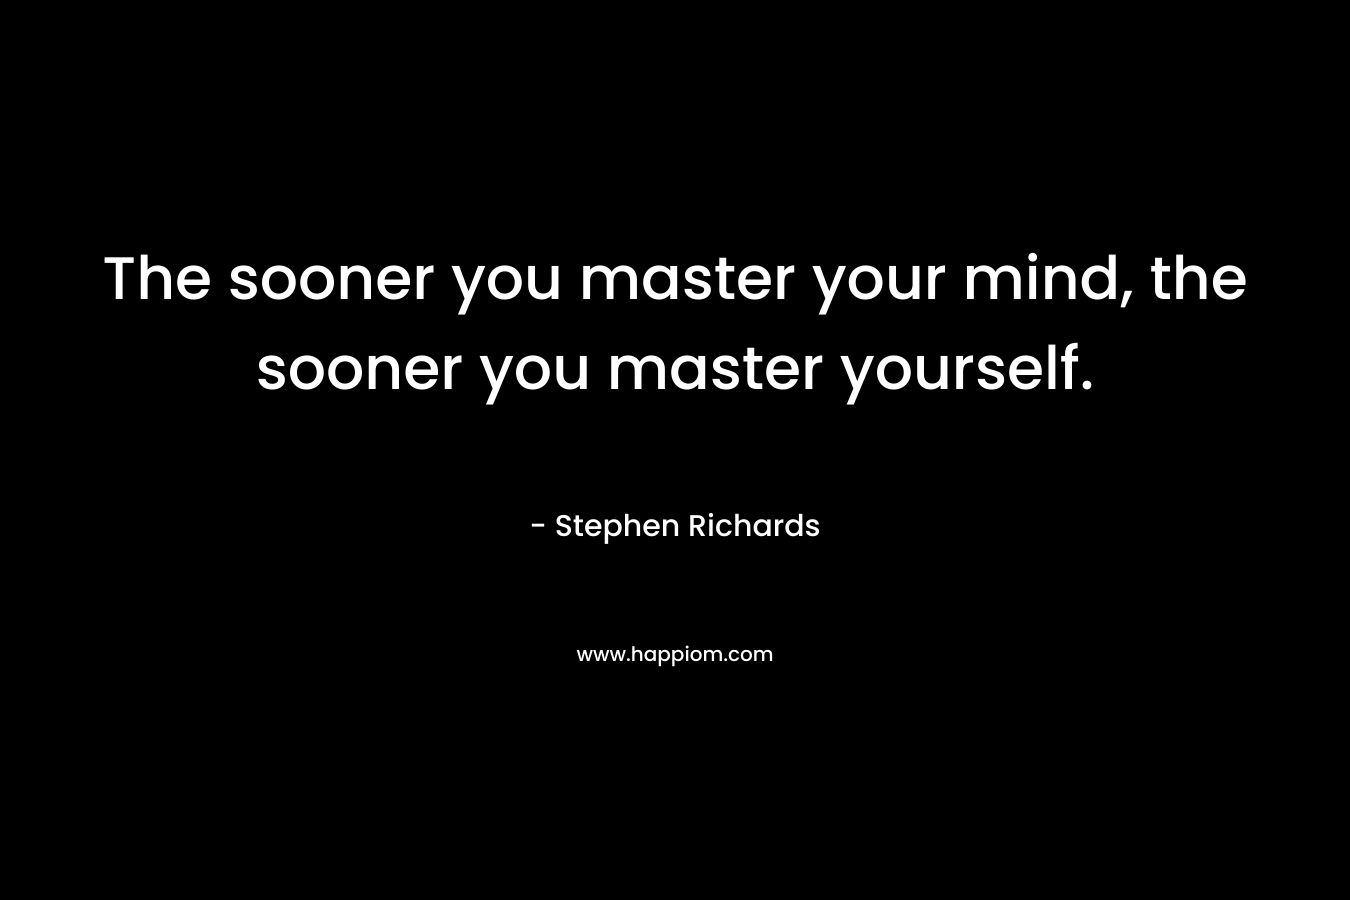 The sooner you master your mind, the sooner you master yourself.